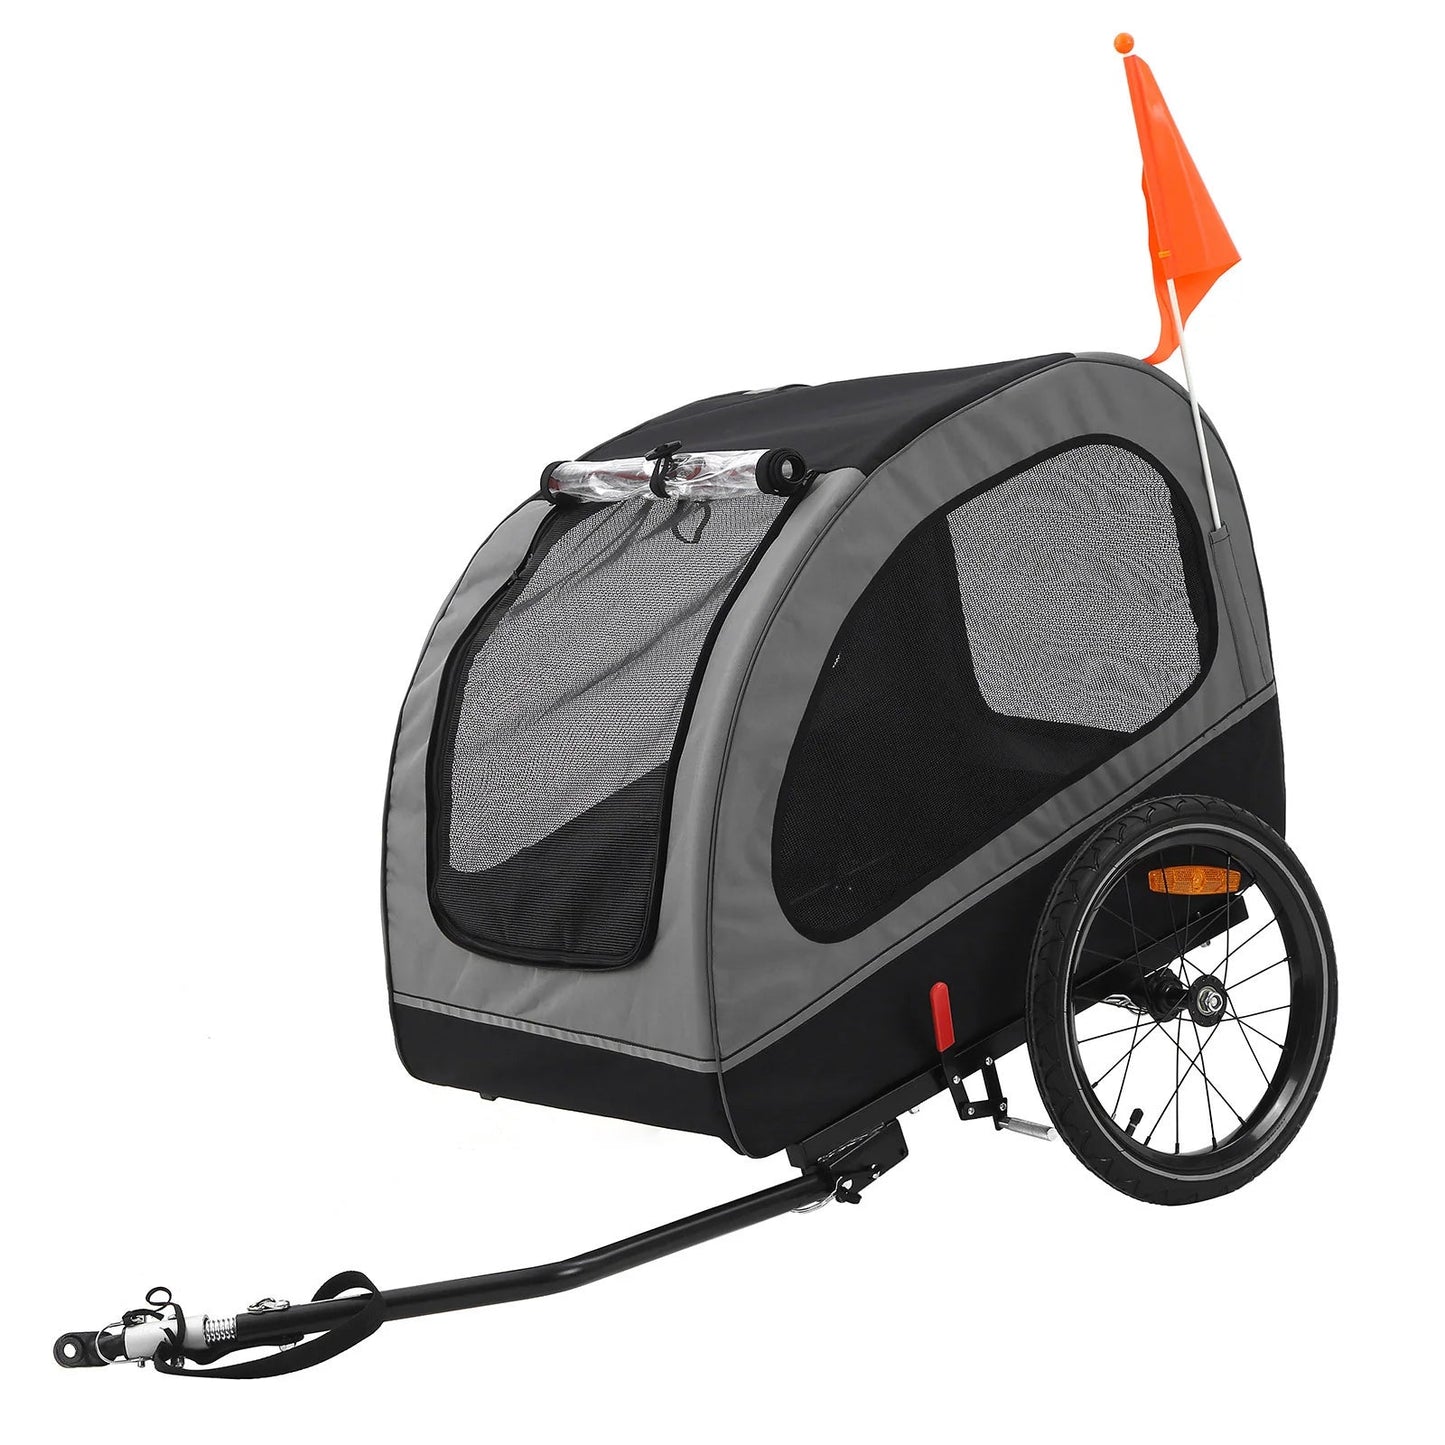 Dog Trailer, Dog Buggy, Bicycle Trailer Medium Foldable for Small and Medium Dogs - Shaggy Chic